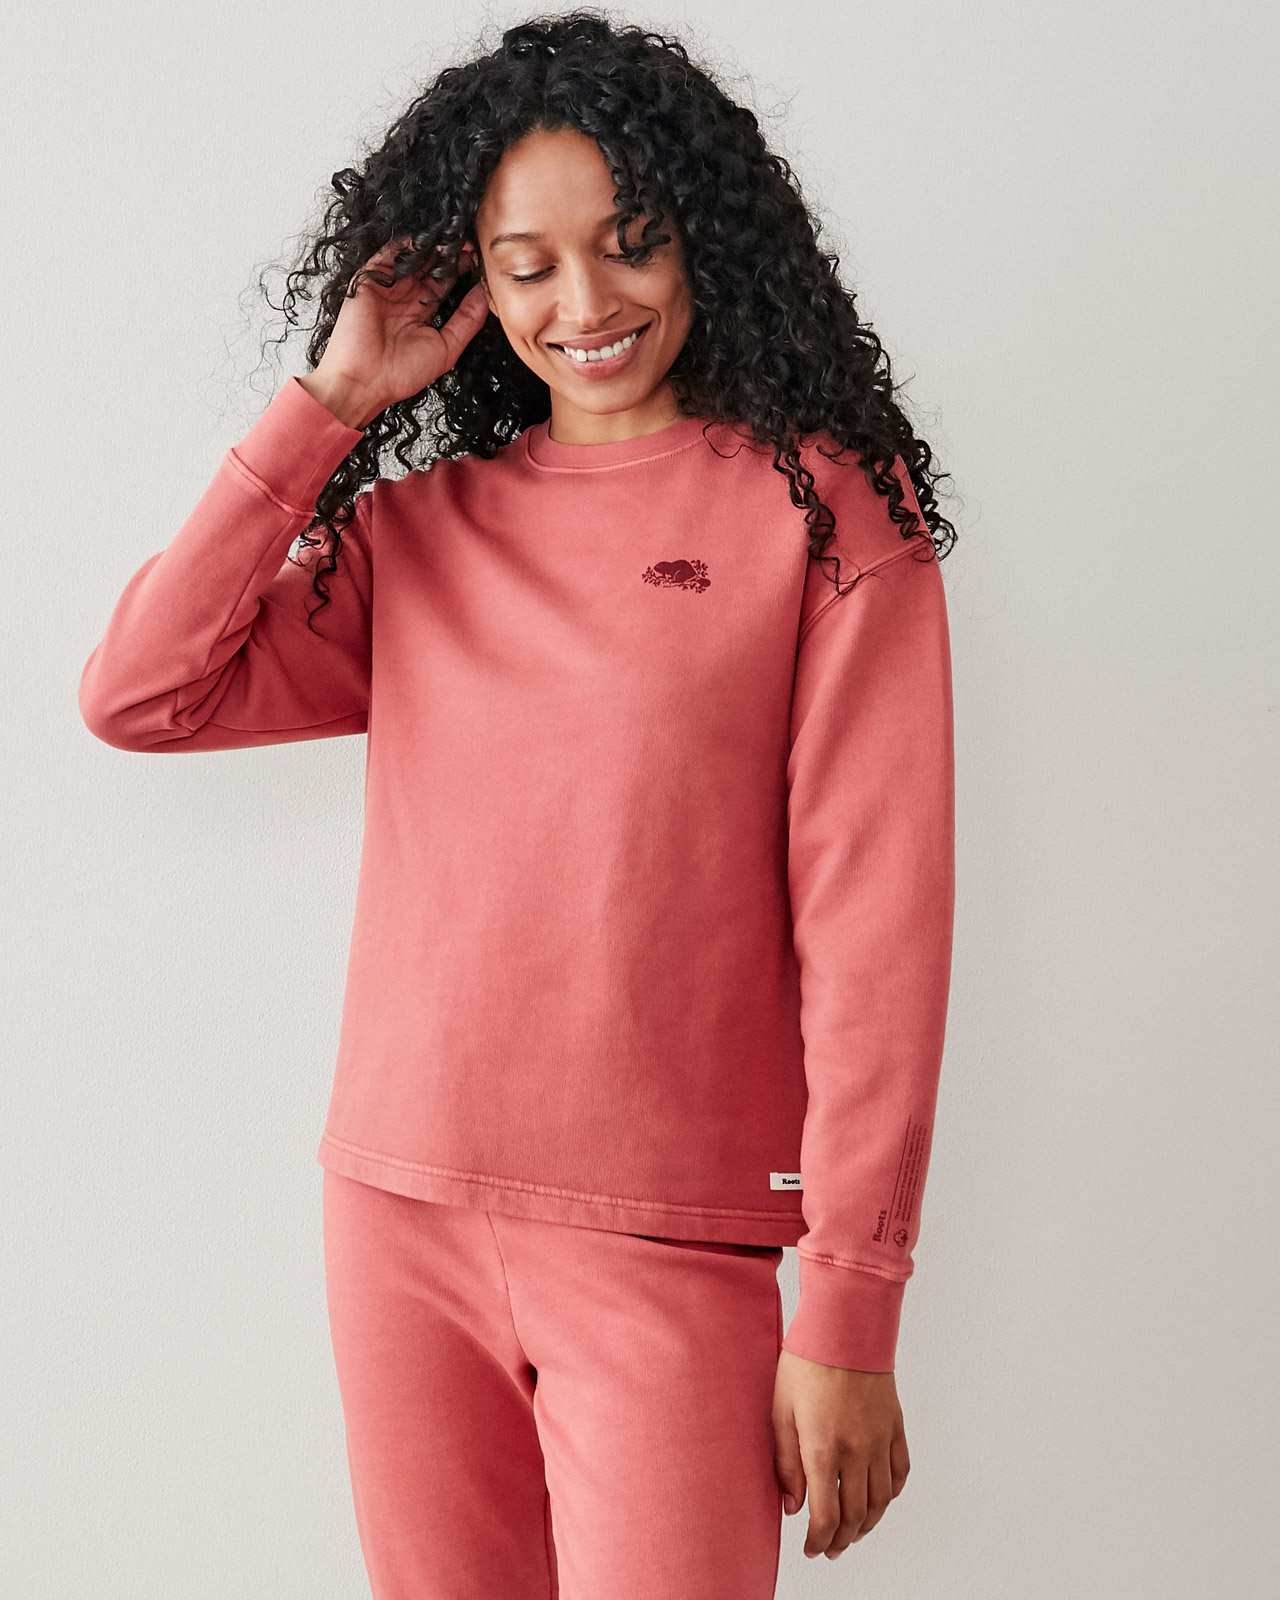 Roots Rubia Red natural dye sweats